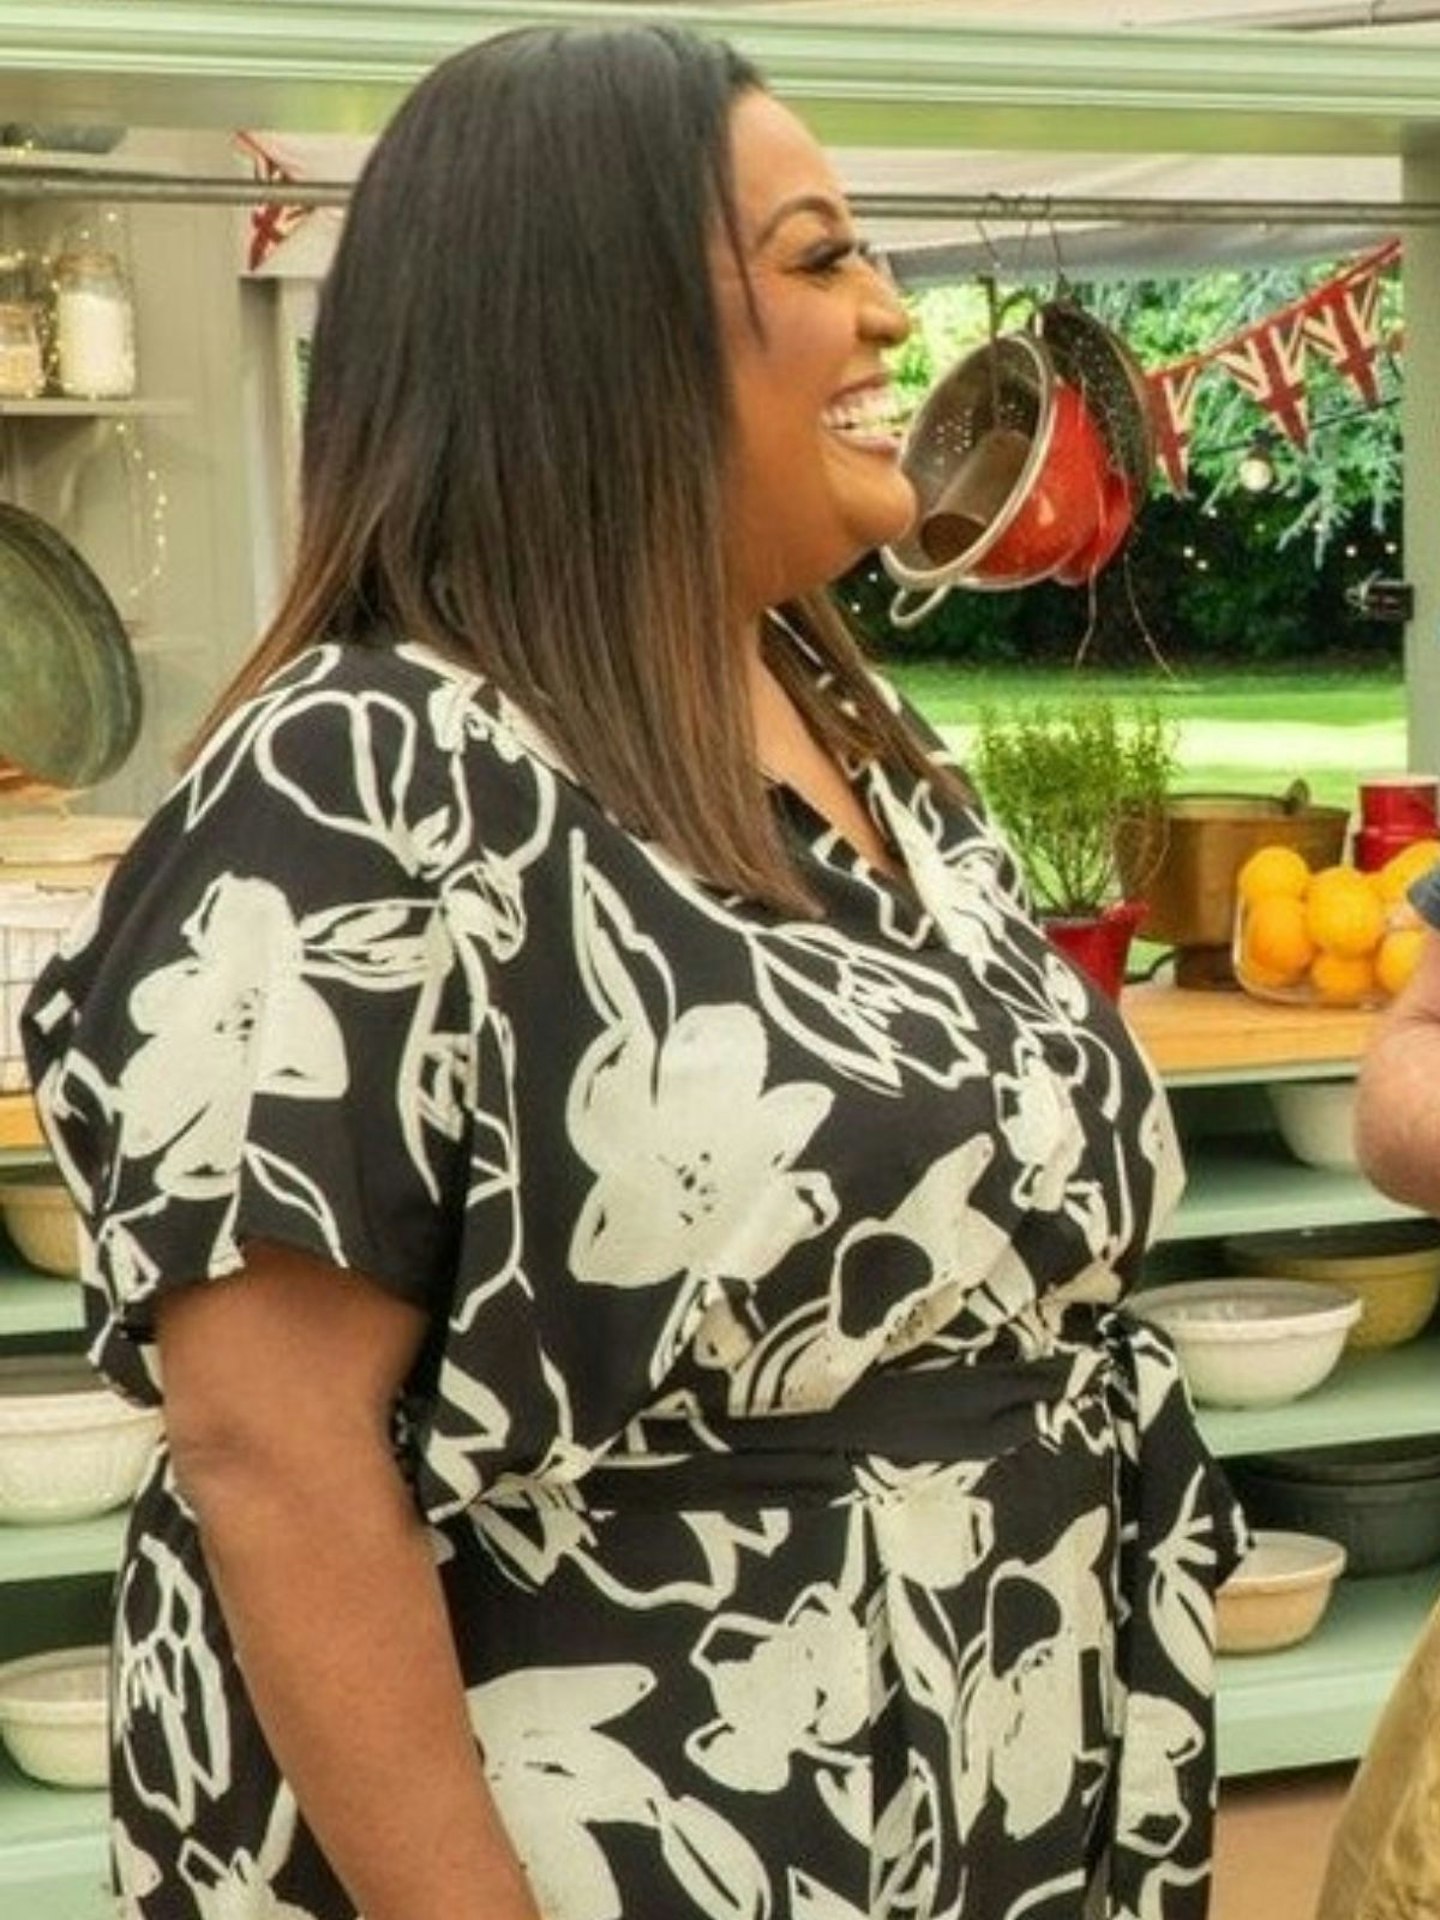 alison-hammond-bake-off-stand-up-to-cancer